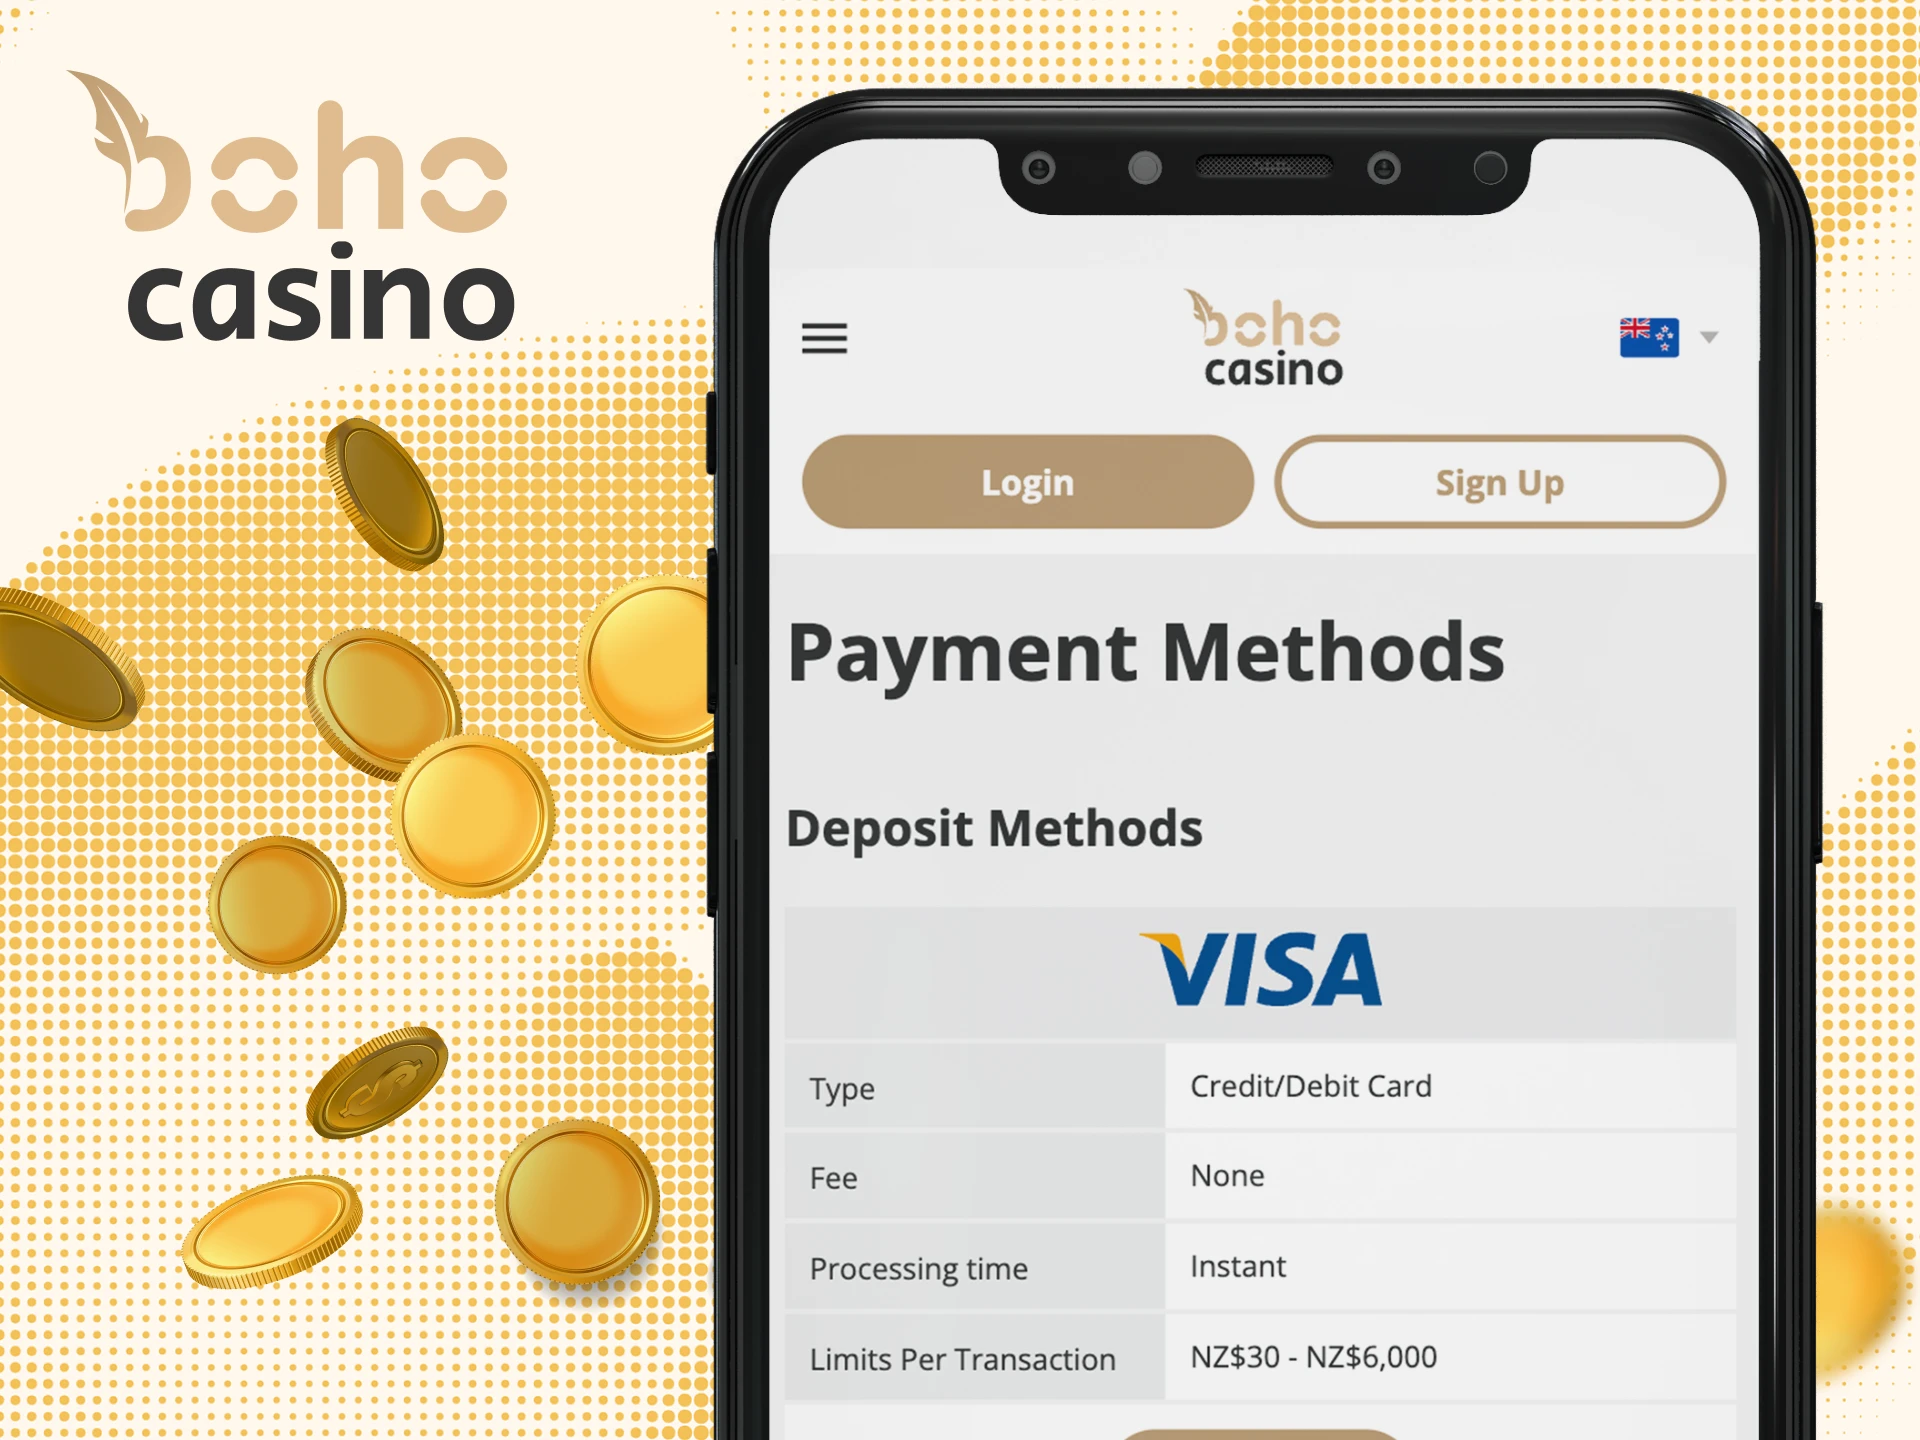 Boho Casino app has all the popular payment methods in New Zealand.